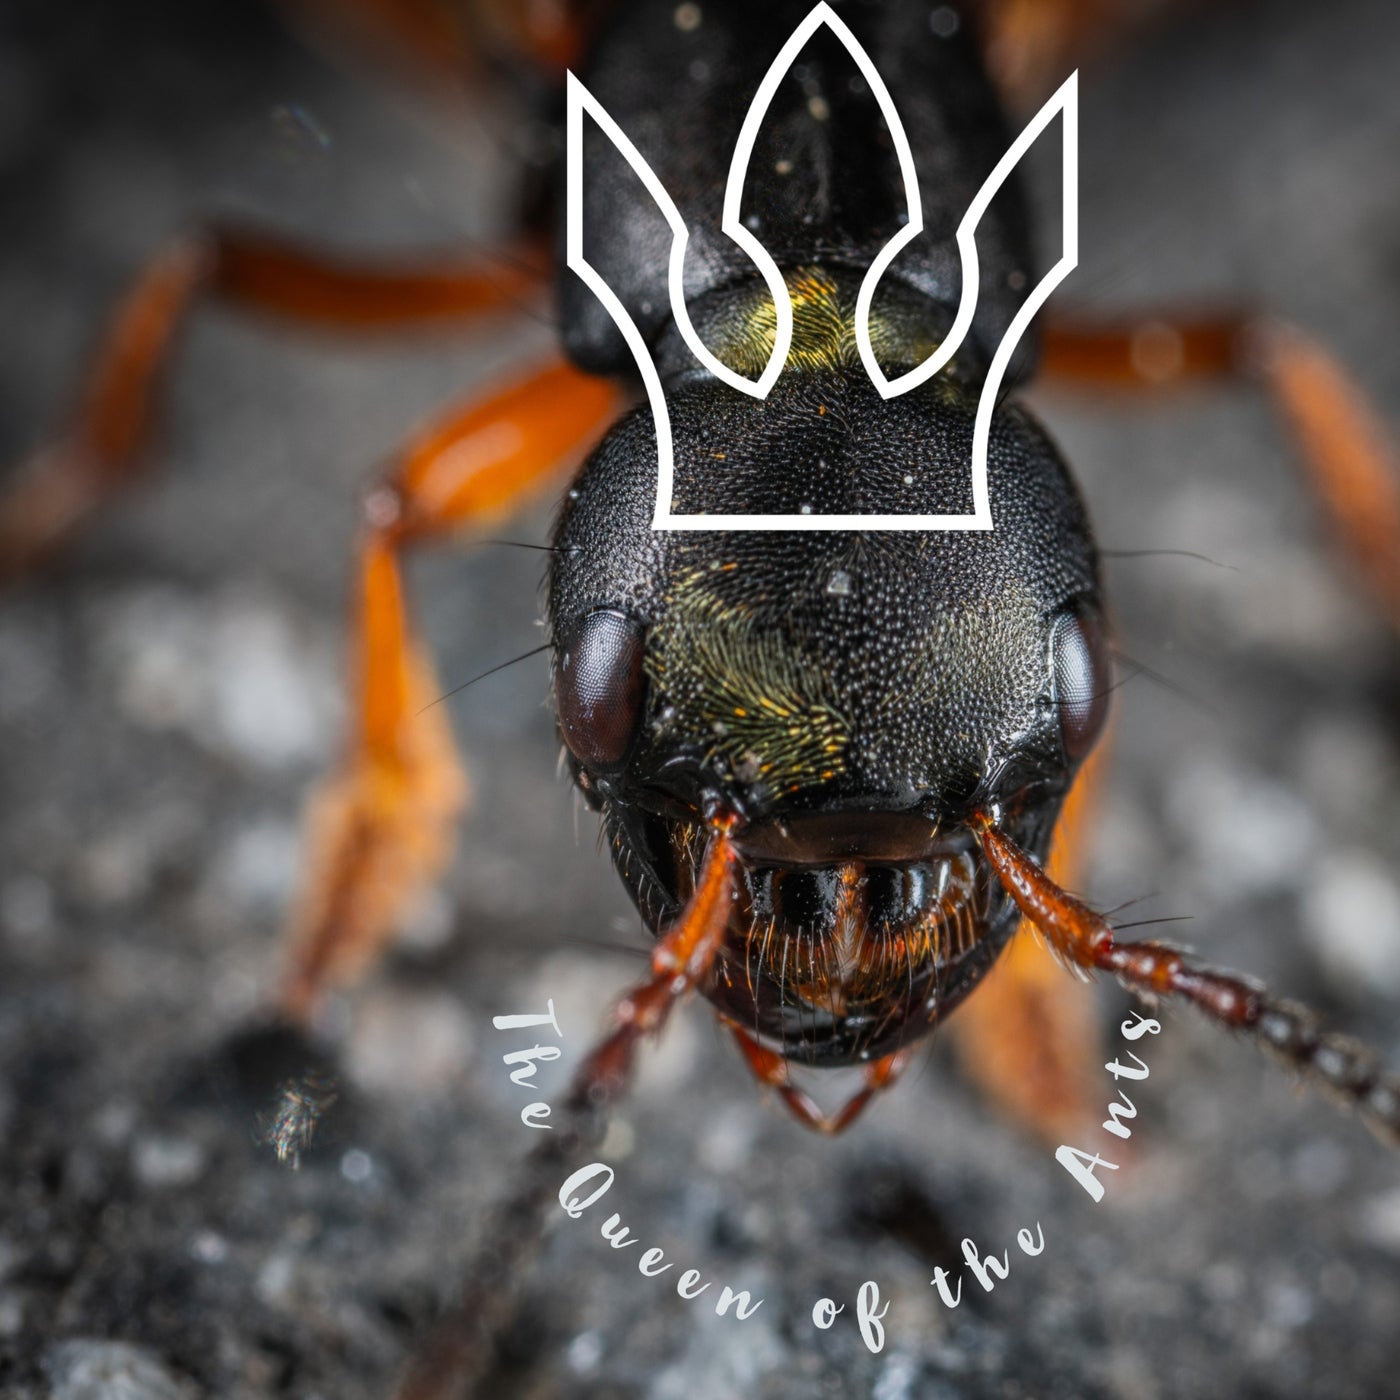 The Queen of the Ants